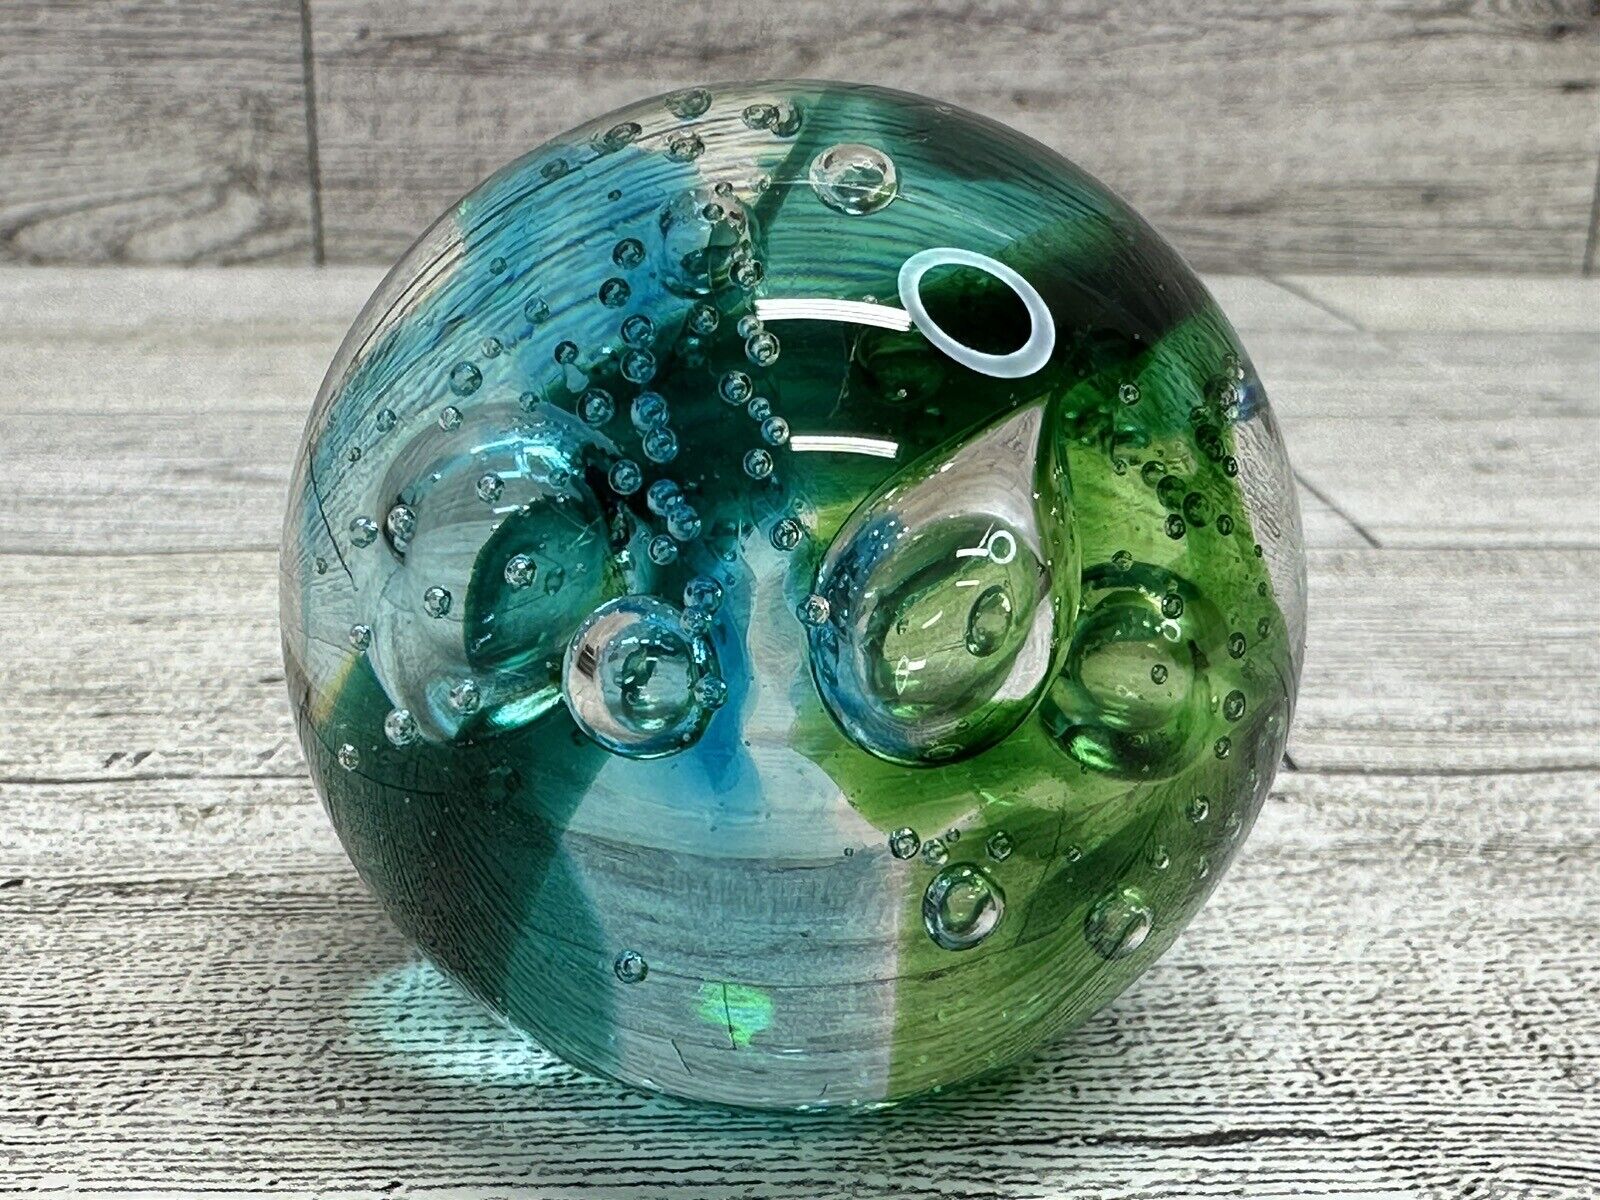 Glass Eye Studio 2003 Blue Green Bubbles Paperweight Marked “GES 03” Dated - 2”